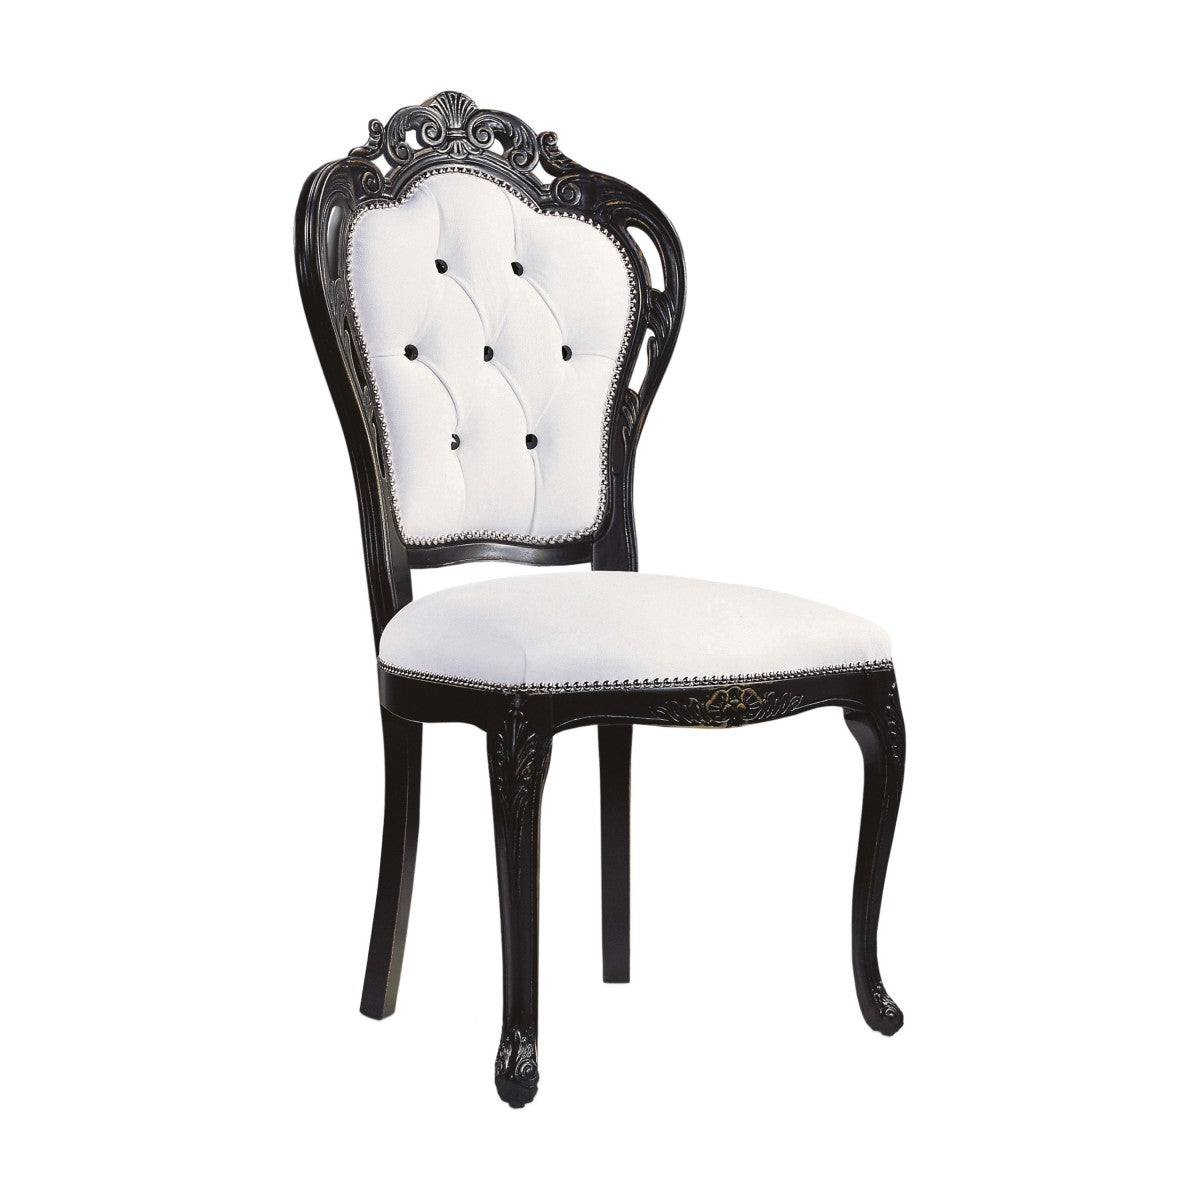 Traforata Bespoke Upholstered Classic Dining Chair MS209S Custom Made To Order